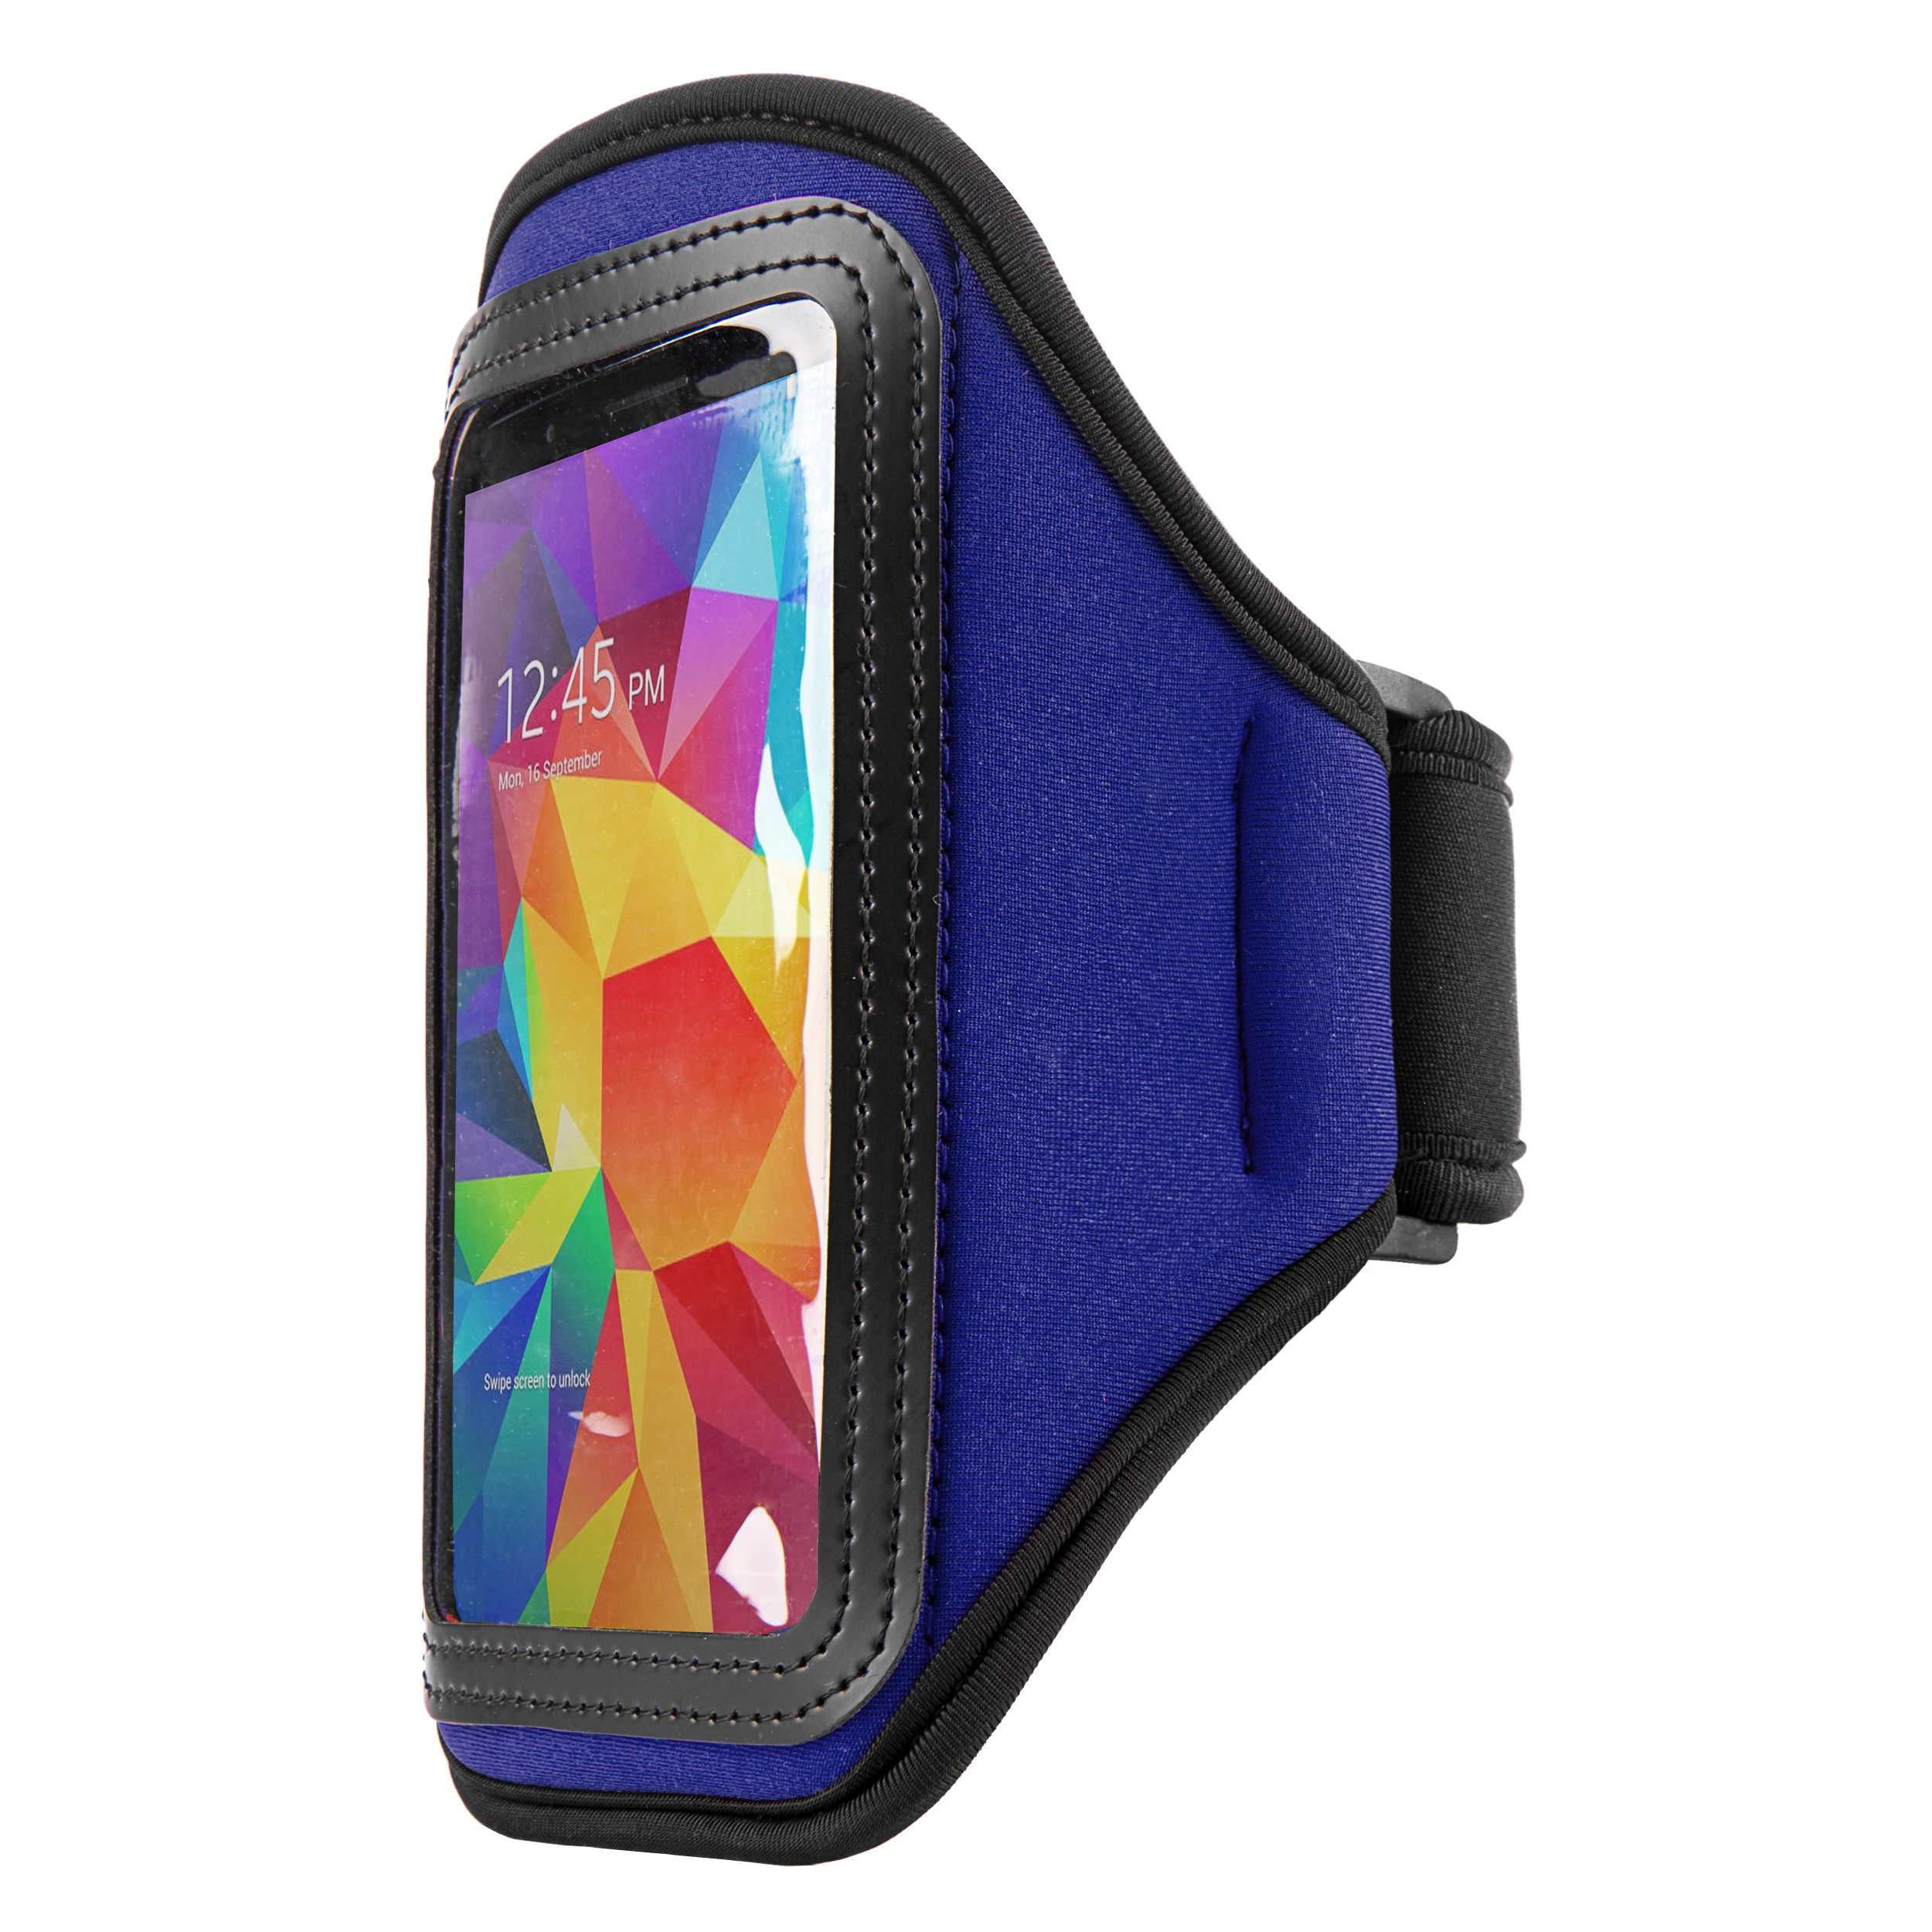 Running Gym Workouts Exercise Phone Armband for Apple iPhone 11/ Xs / 8 / 7 - image 2 of 8